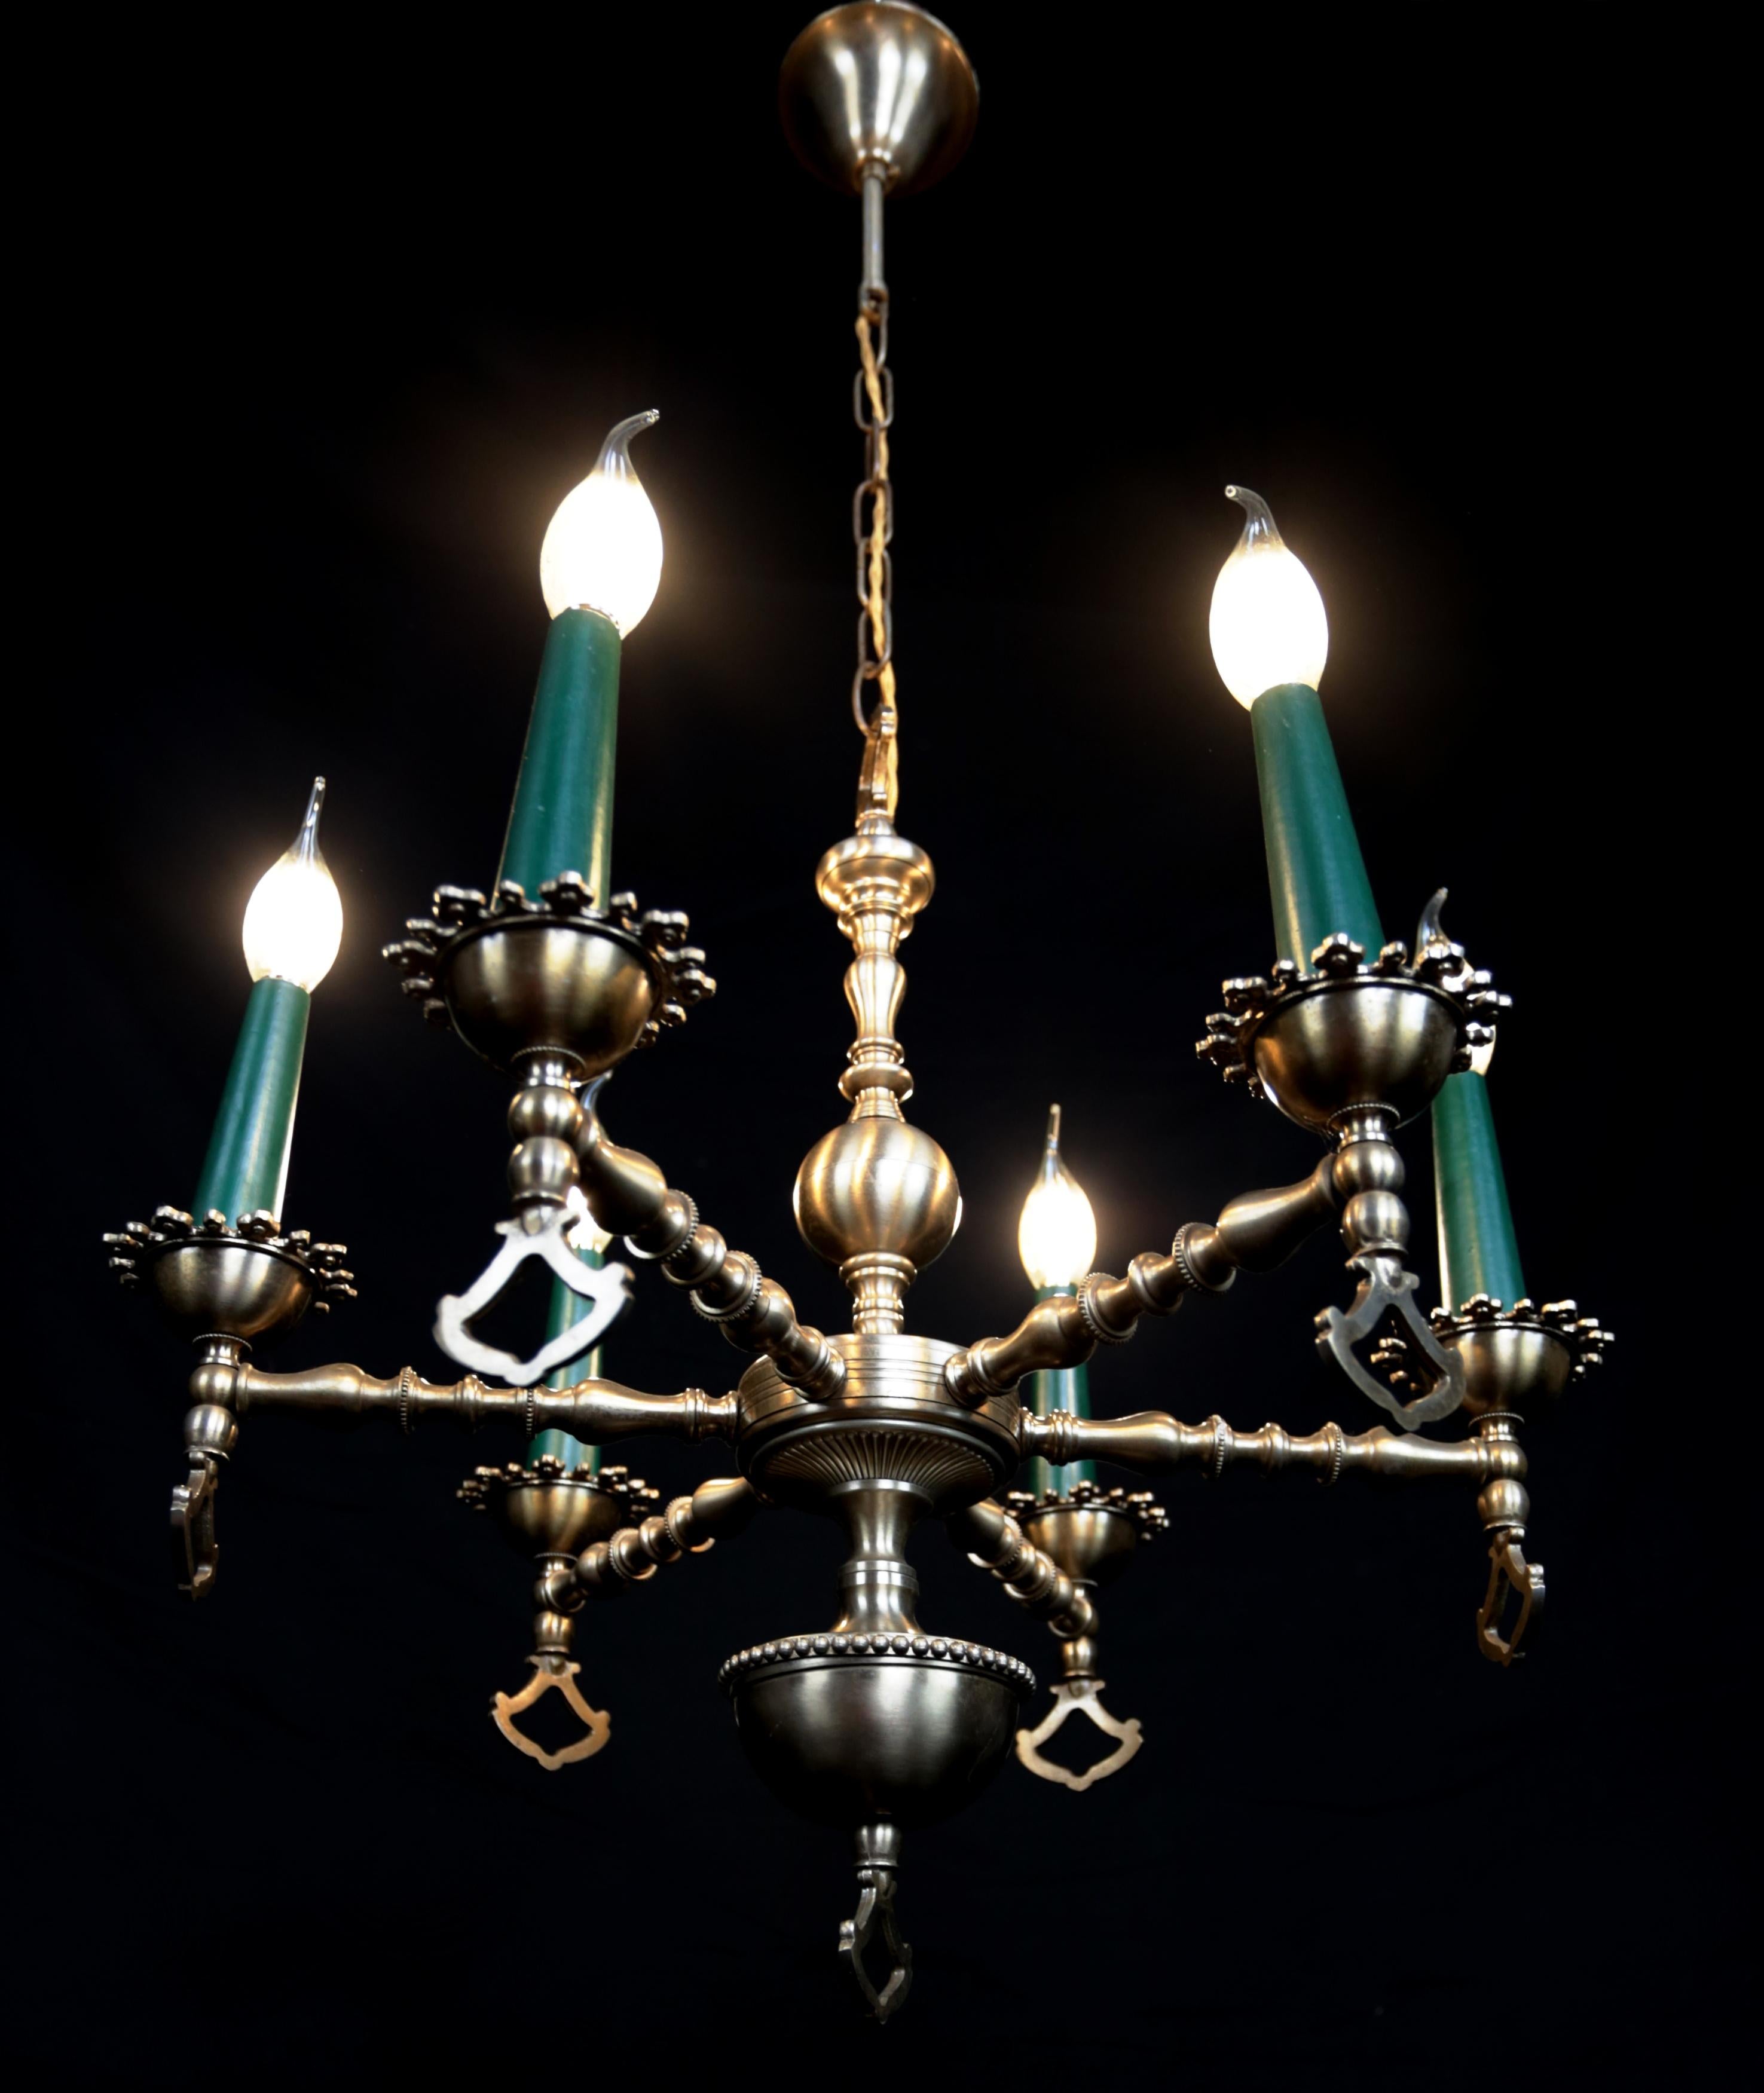 Neo-Renaissance six-armed chandelier

Quality chandelier made of patinated brass in Renaissance style. The chandelier is restored: a new old-style power cord with fabric braiding in gold color. New internal wiring. The chandelier is for 6 candle